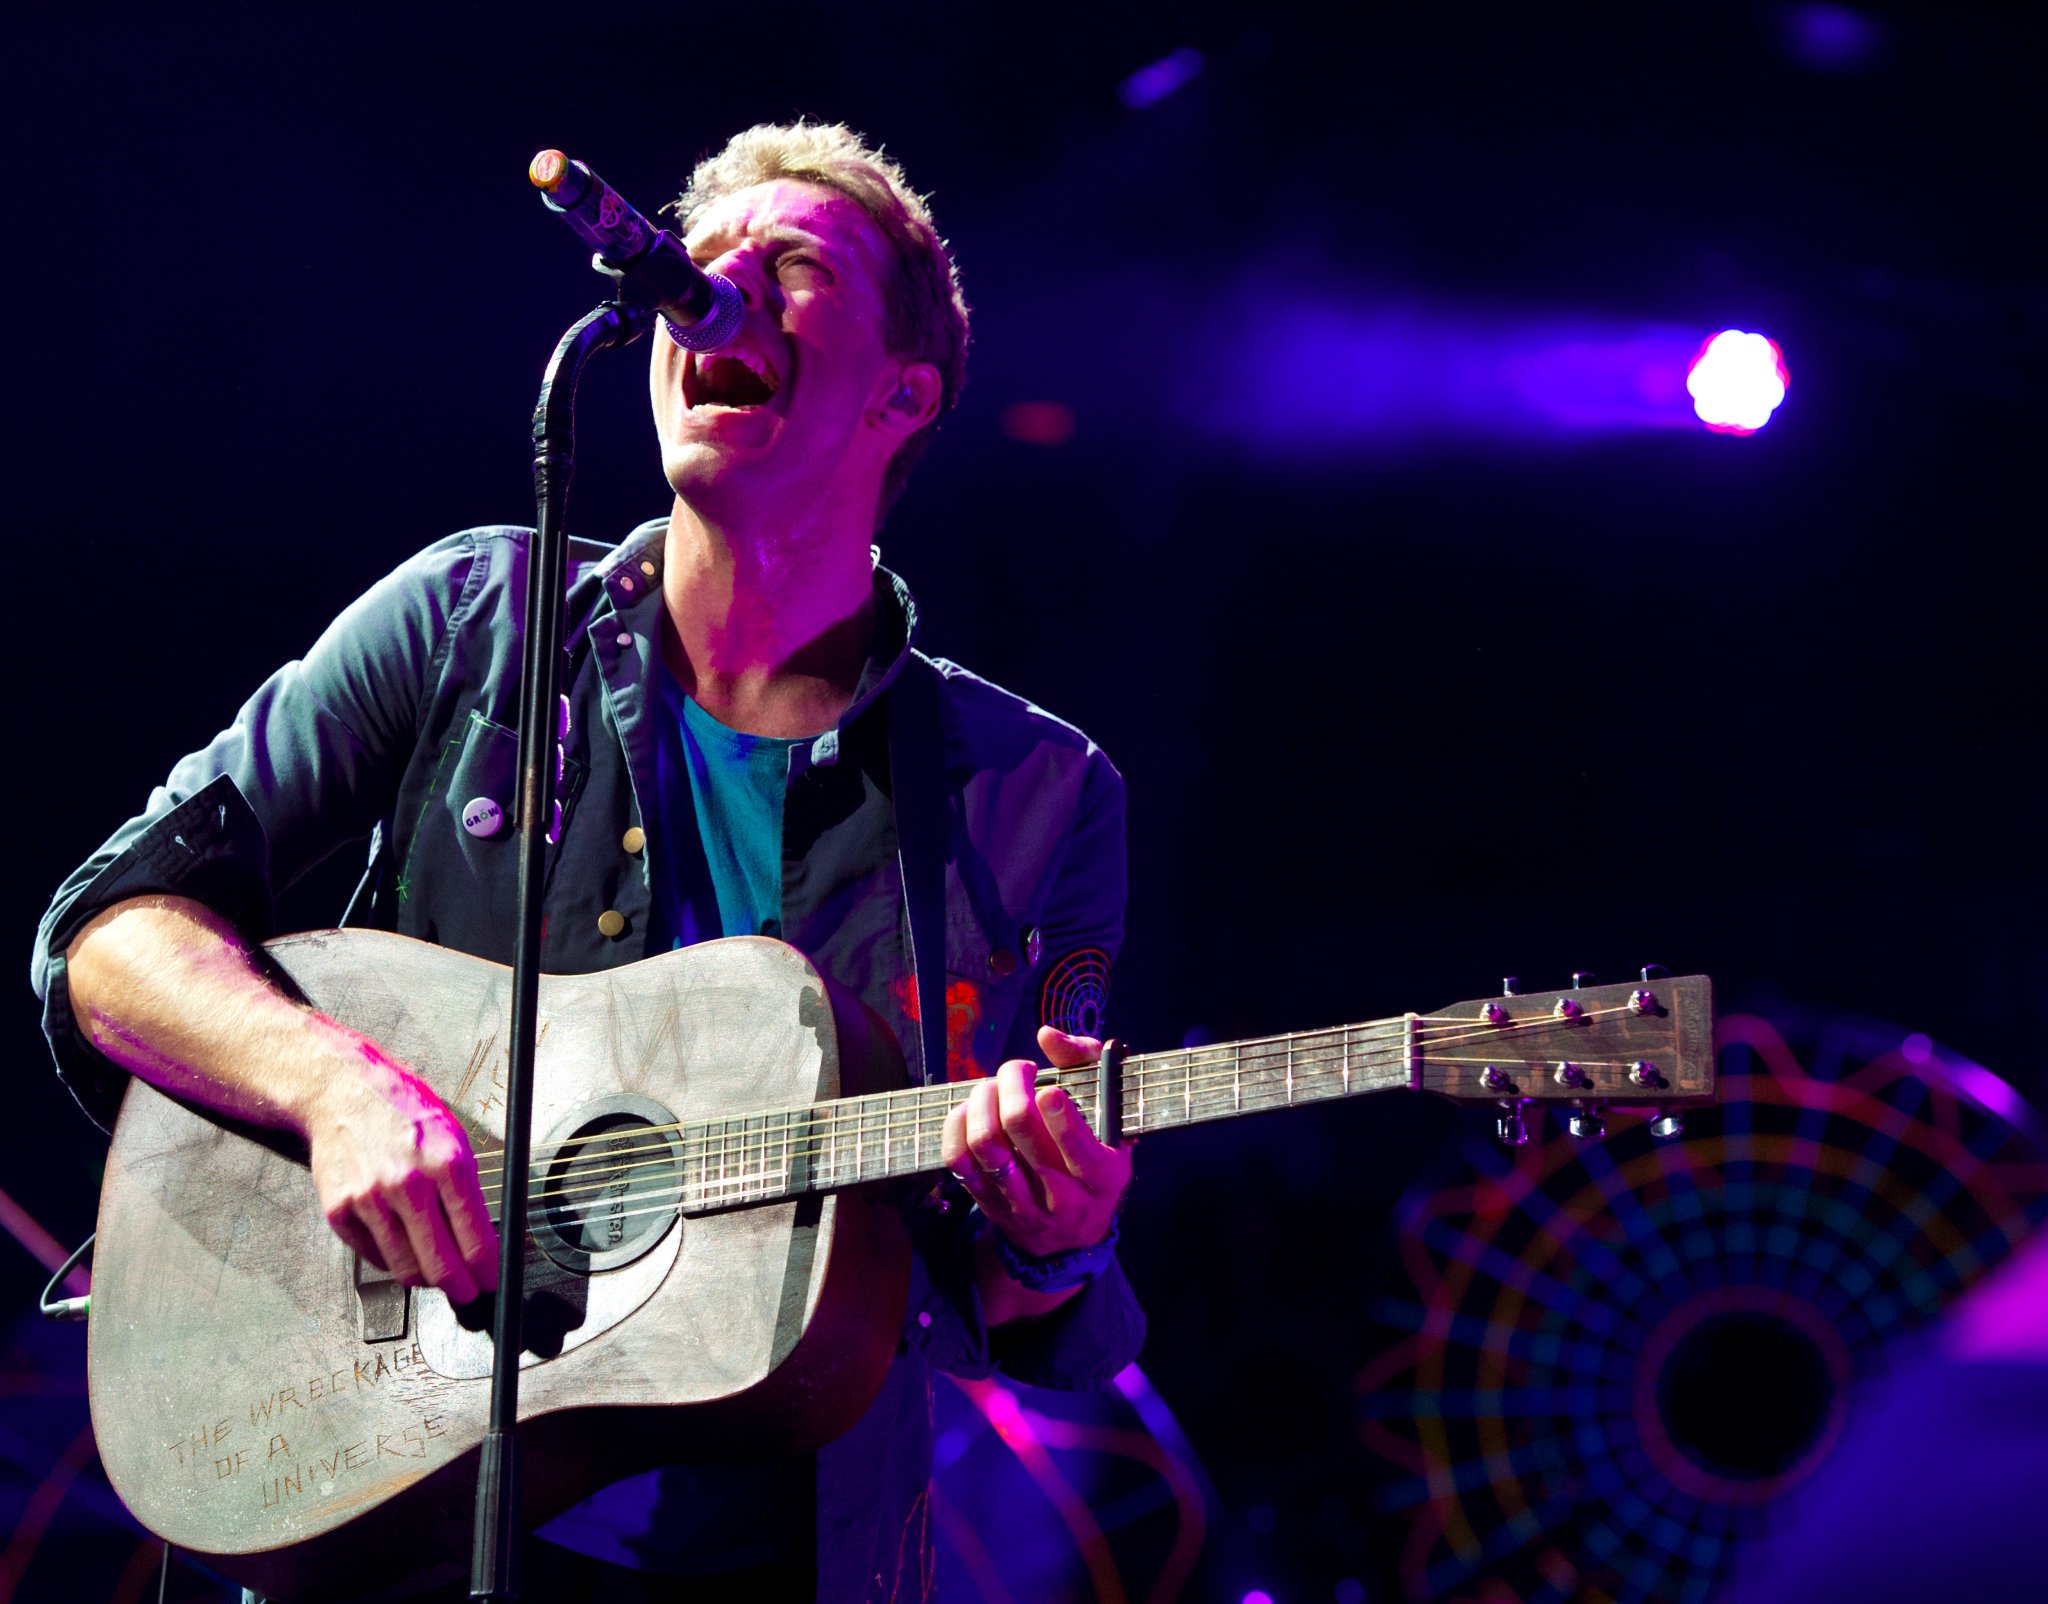  to when was here in 2012. Happy Birthday, Chris Martin! 